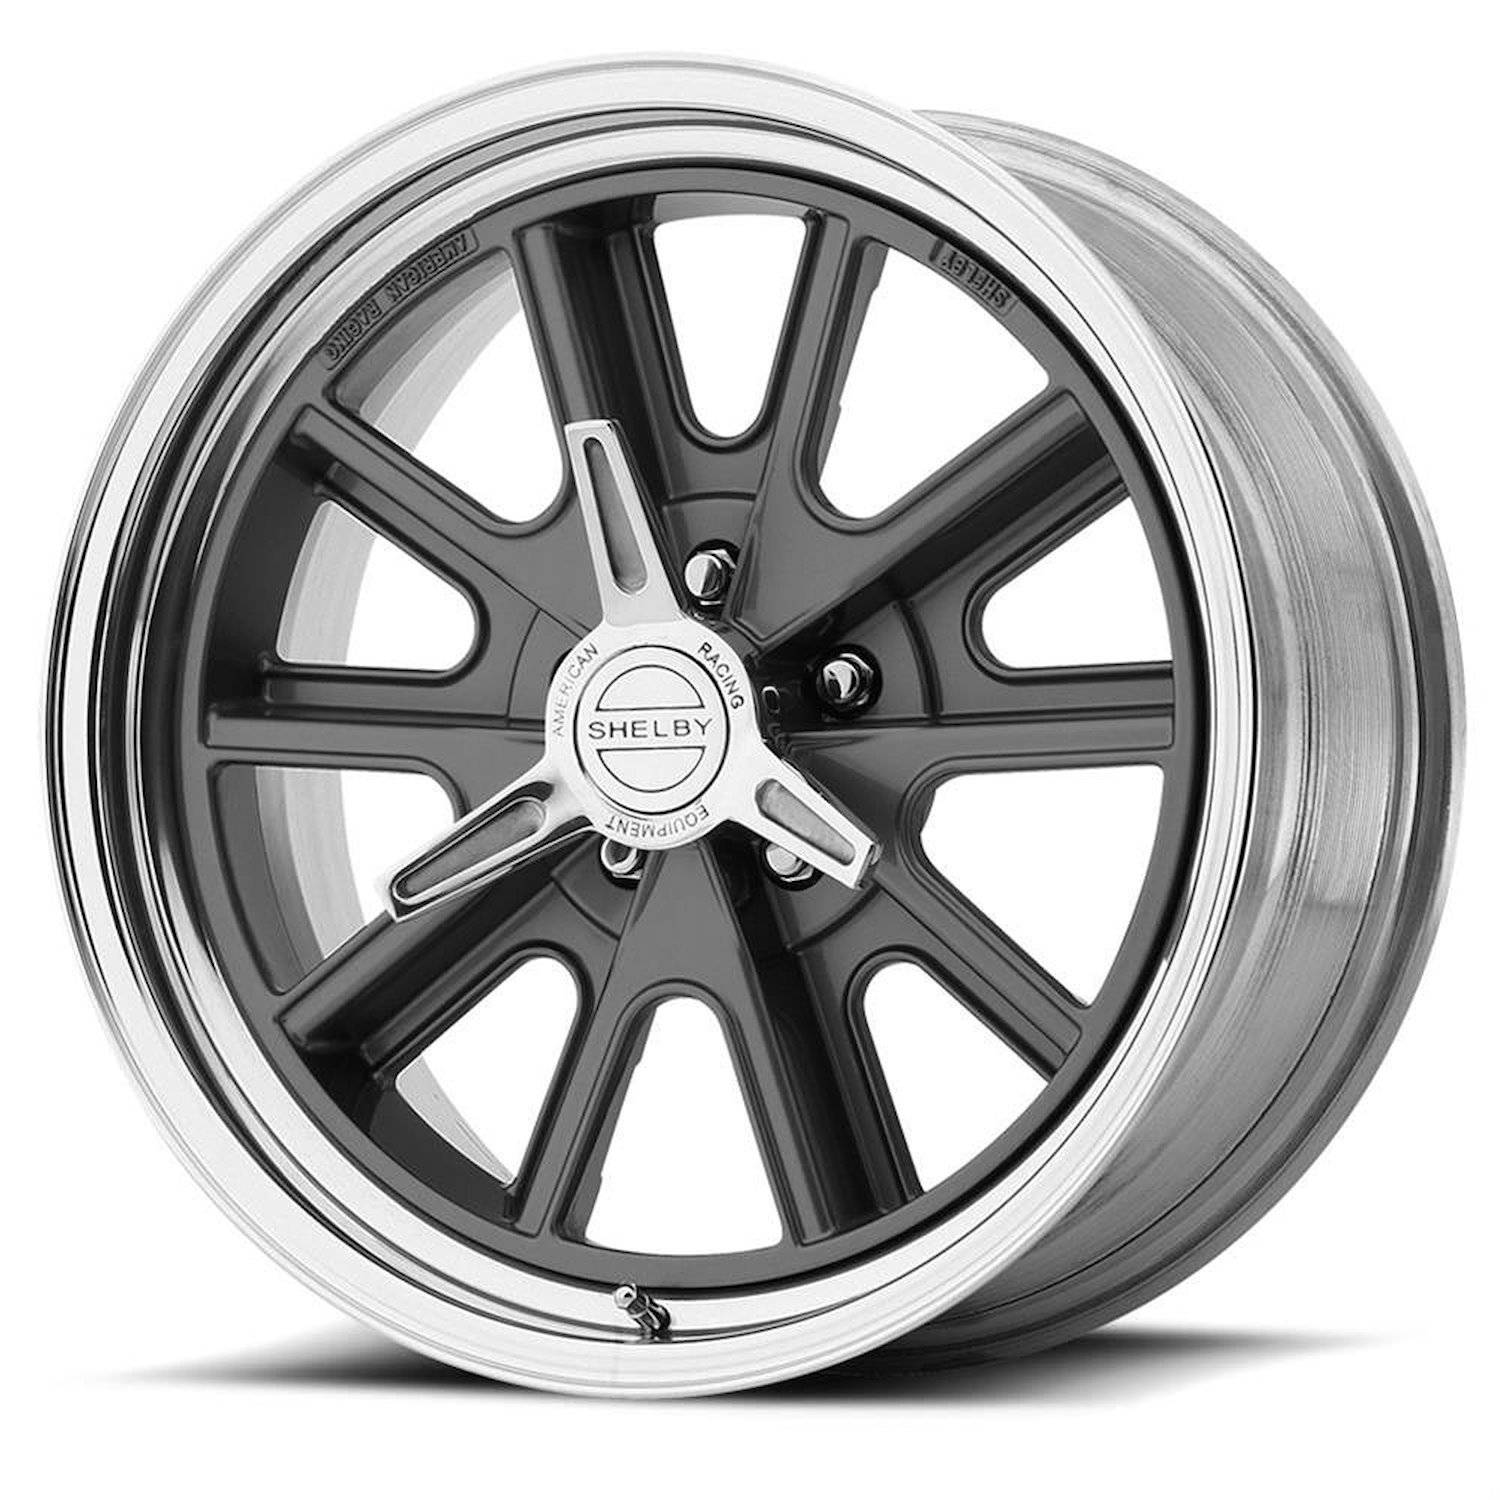 AMERICAN RACING 427 SHELBY COBRA TWO-PIECE MAG GRAY CENTER POLISHED BARREL 15 x 8 5x4.5 -25 3.52